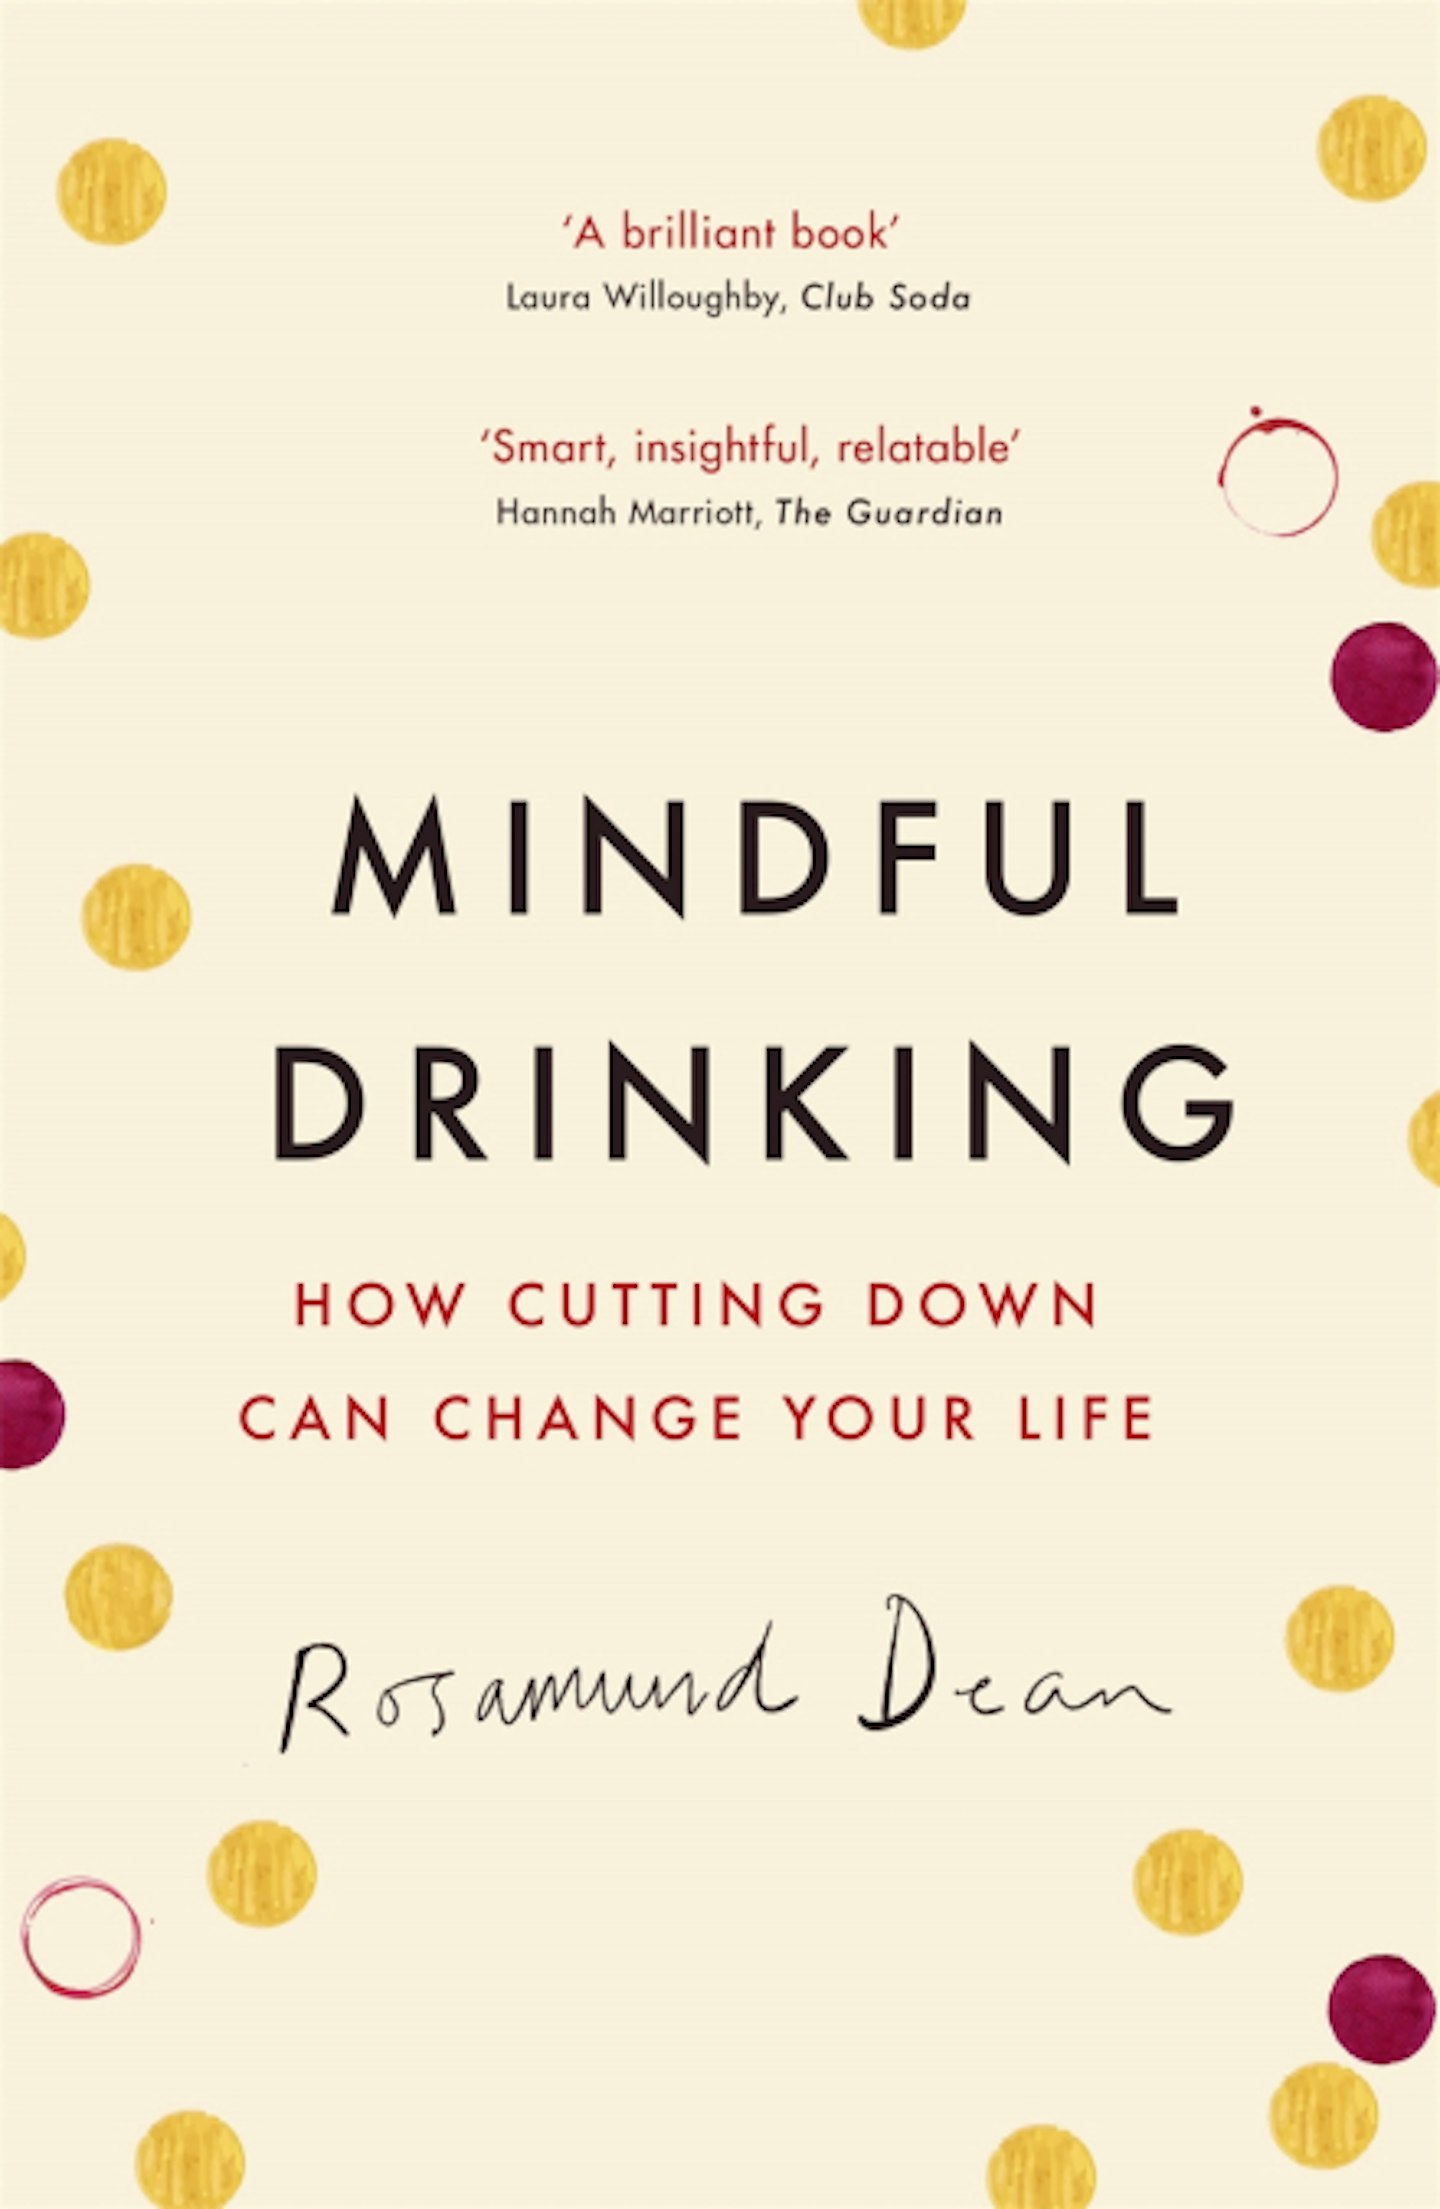 Mindful Drinking: How Cutting Down Can Change Your Life, by Rosamund Dean